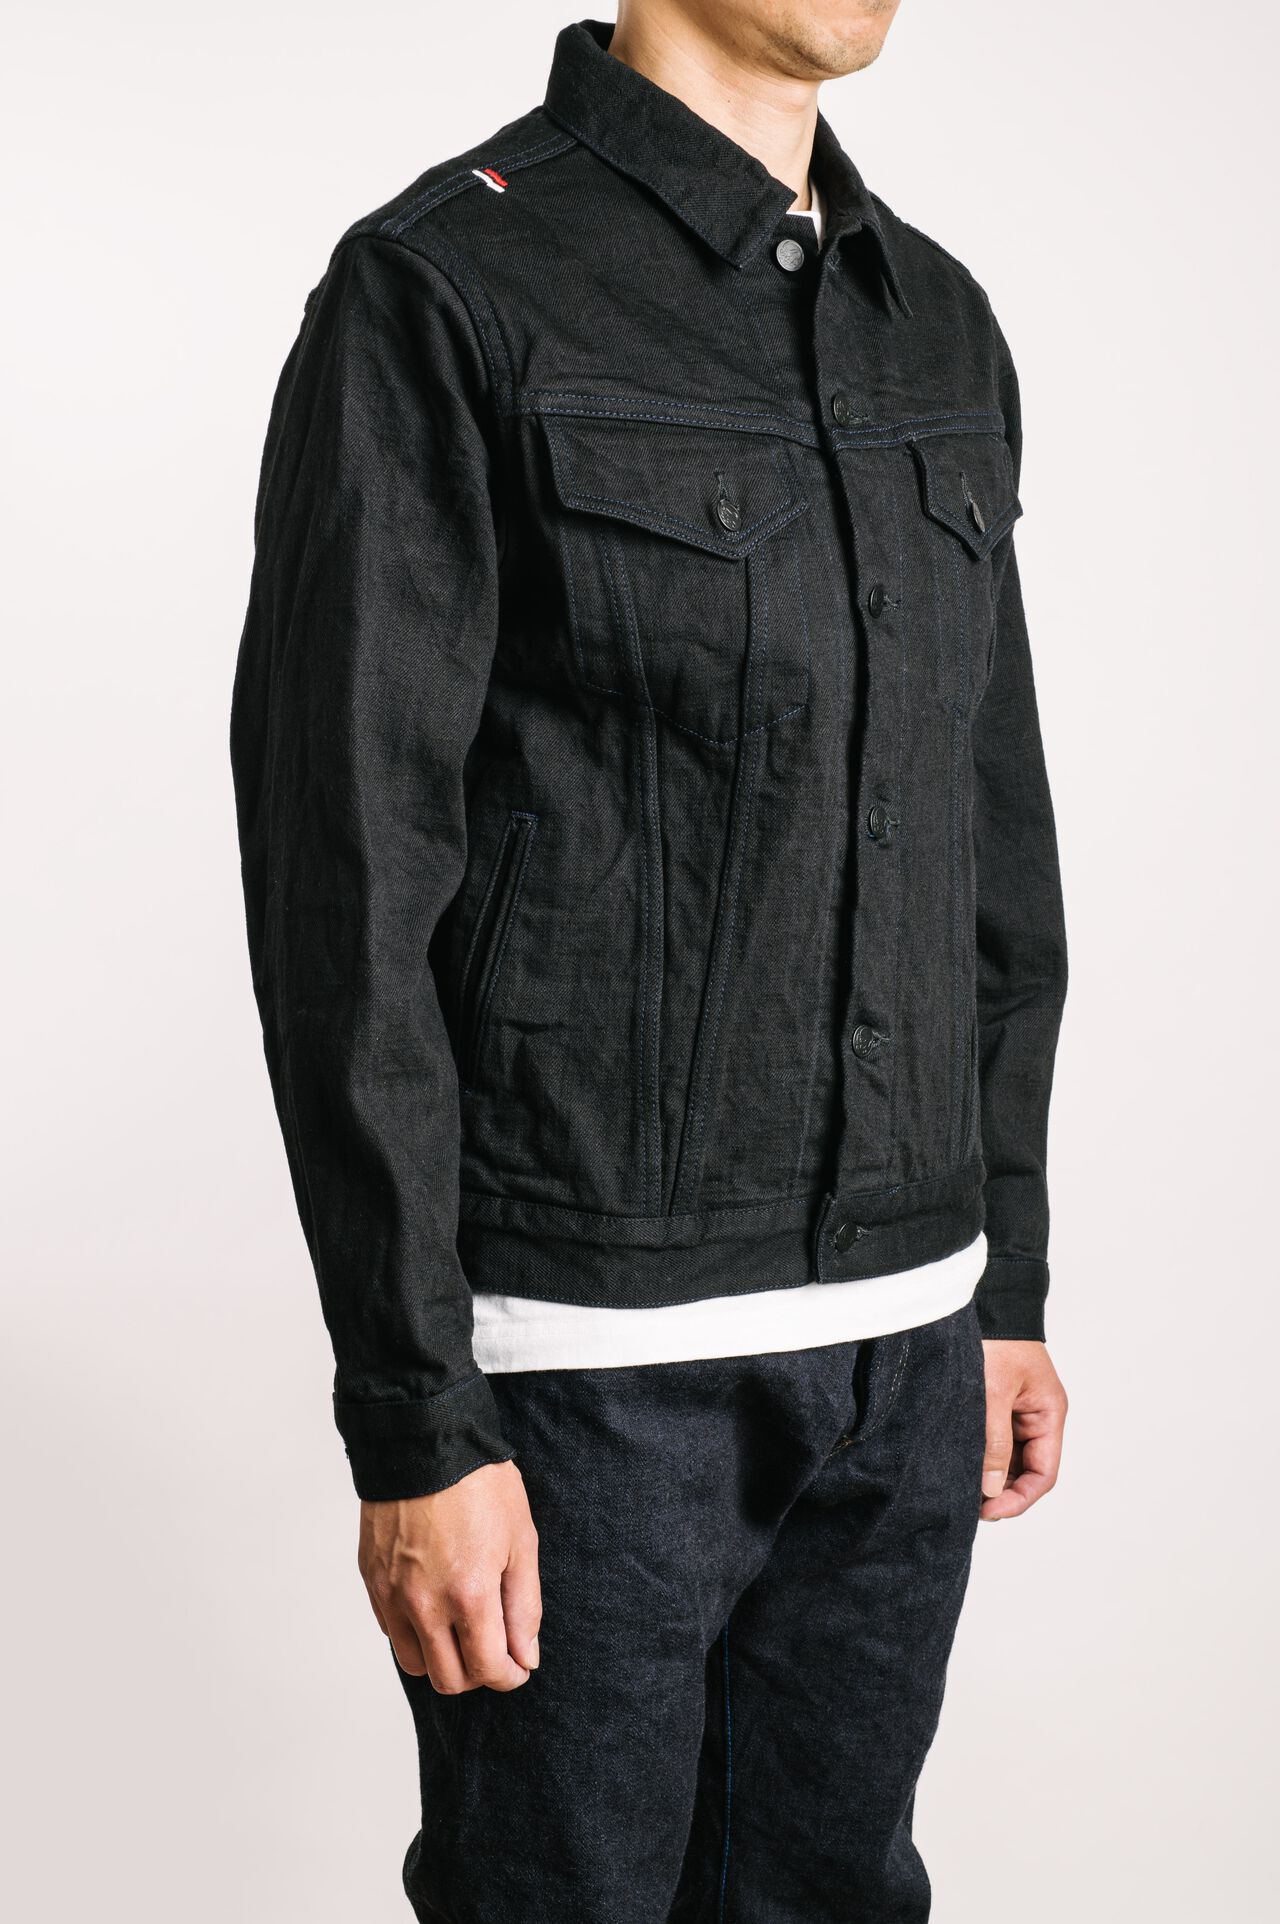 BKJKT3 15.5oz 3rd type Jacket with handwarmers-40-One Wash,, large image number 2